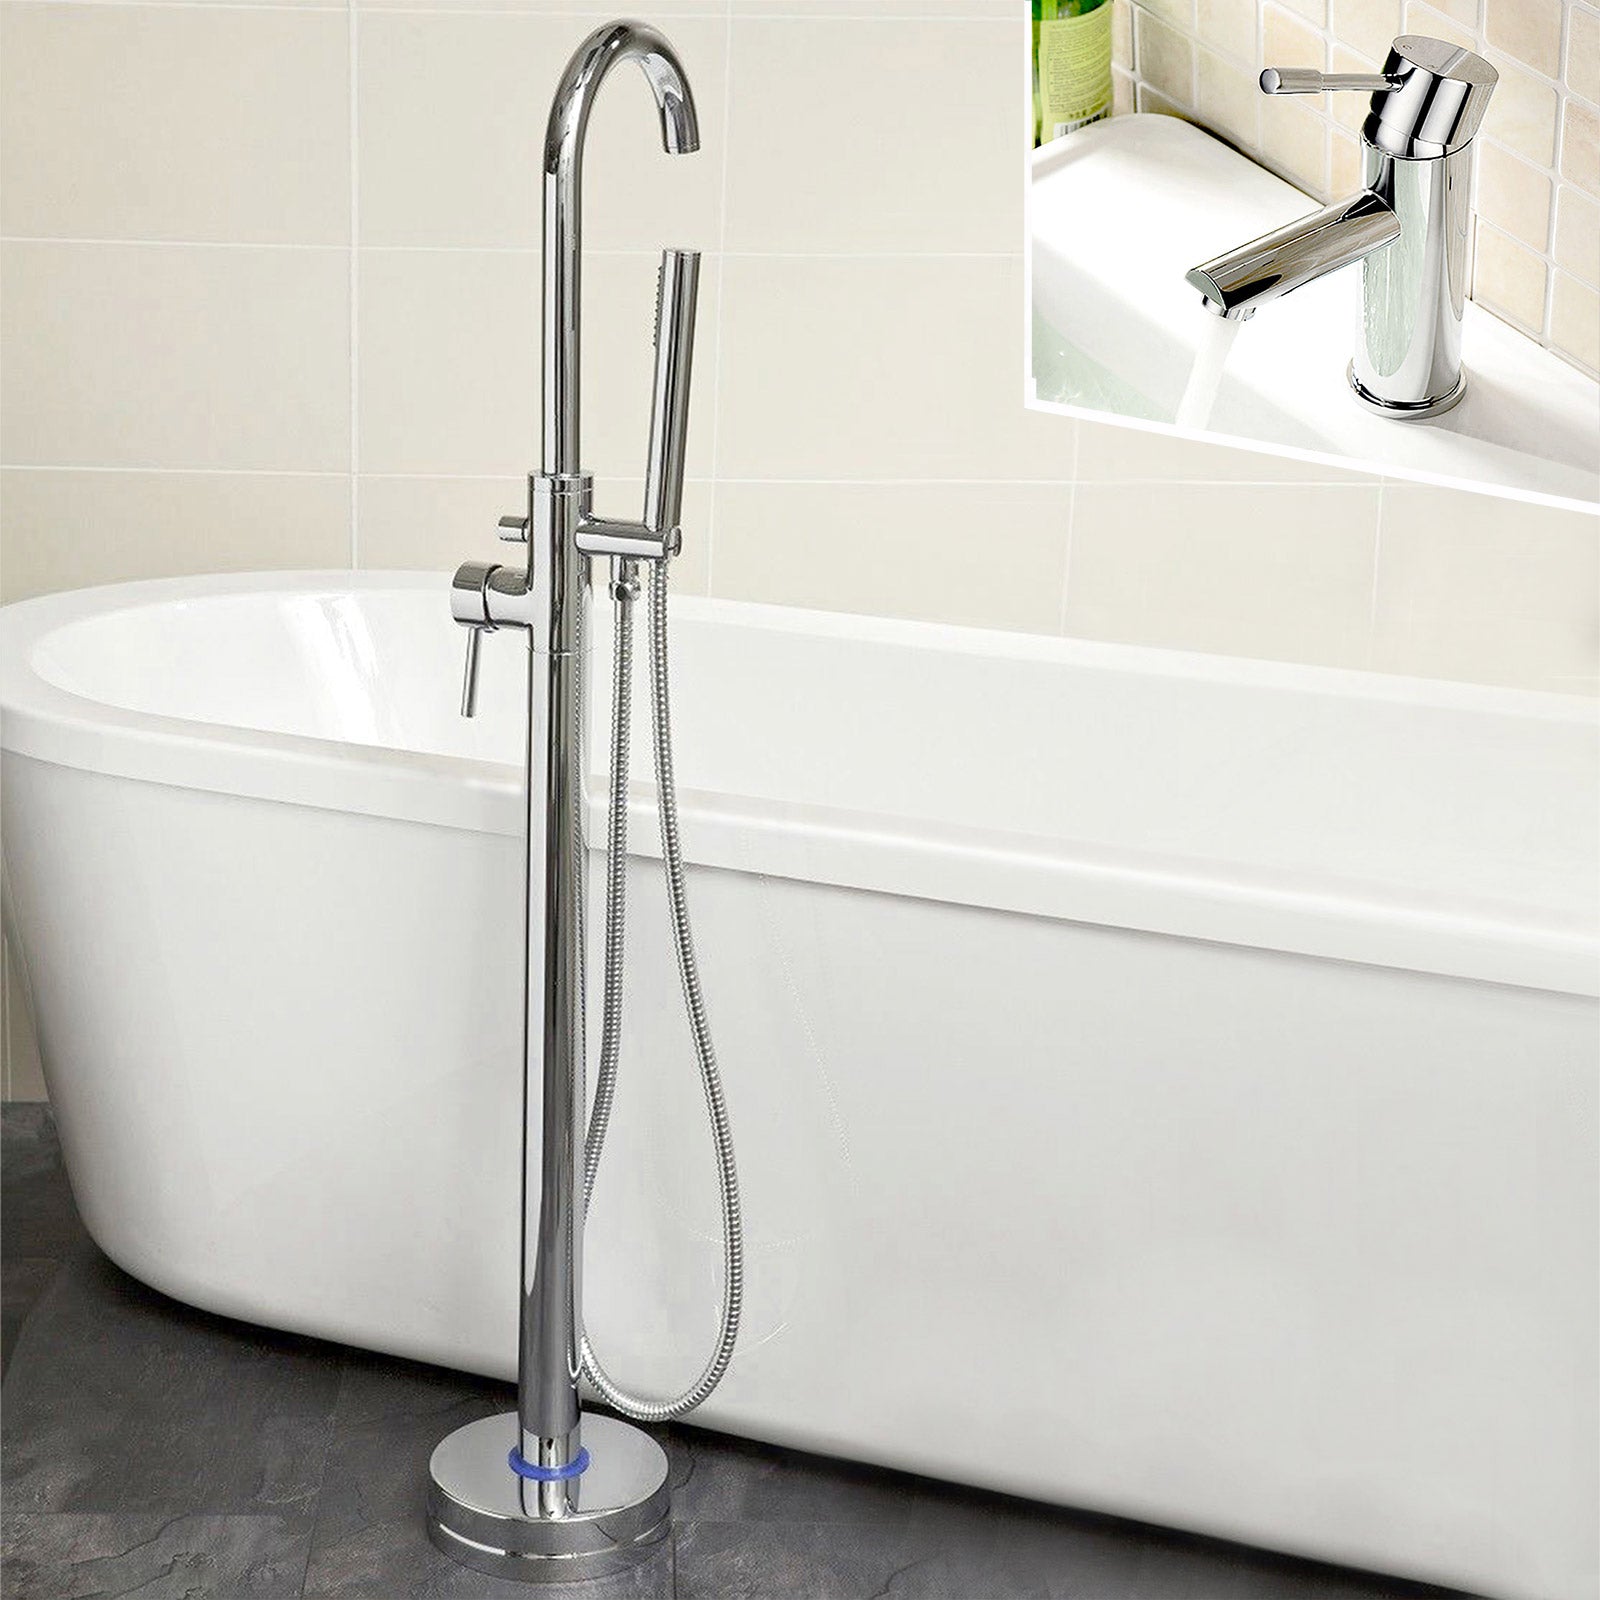 Marc Contemporary Basin Single Lever Tap And Freestanding Bath Shower Mixer Tap With Handset Kit + Click Waste